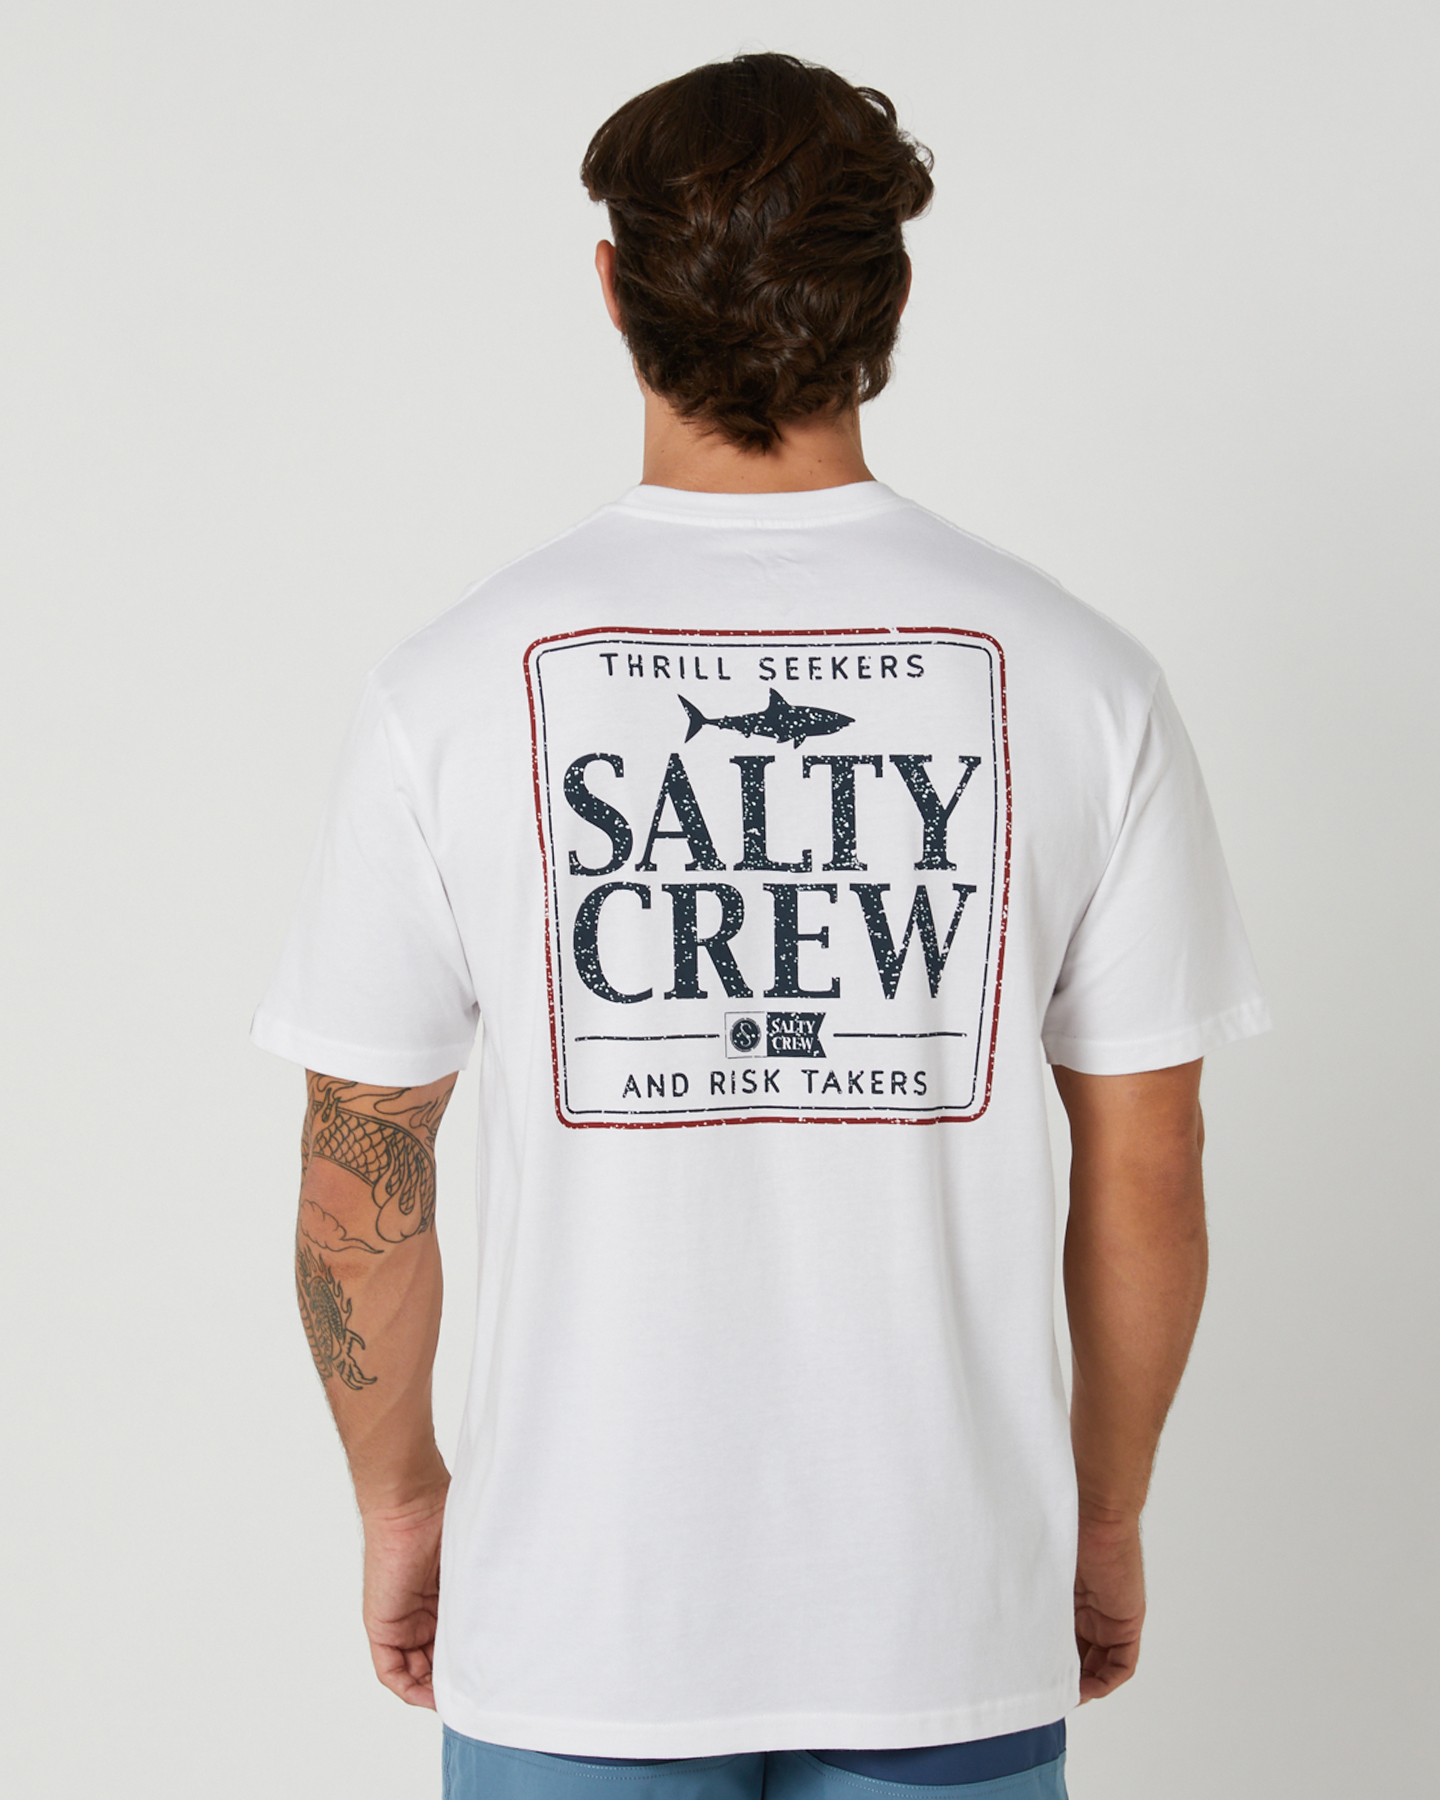 https://content.surfstitch.com/image/upload/v1698396617/20035587WHI/WHITE-MENS-CLOTHING-SALTY-CREW-GRAPHIC-TEES-20035587WHI_1.JPG